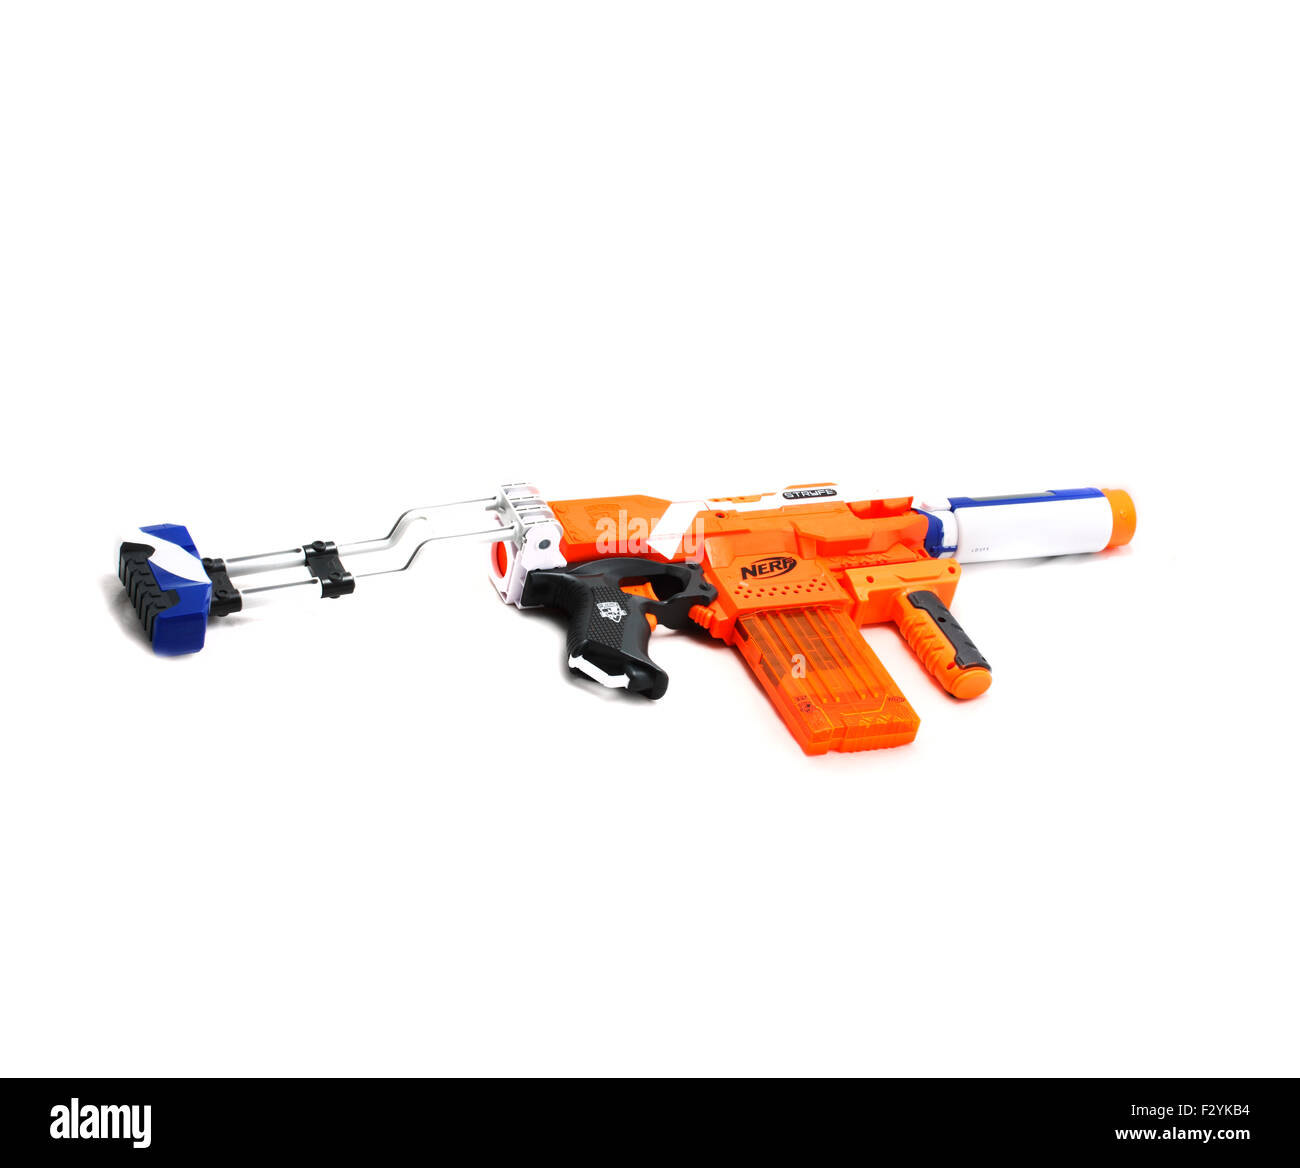 Nerf Gun Elite - Elite SD-Stryfe A Nerf Blaster is a toy gun made by Hasbro that fires foam darts, discs, or, in some cases, foa Stock Photo